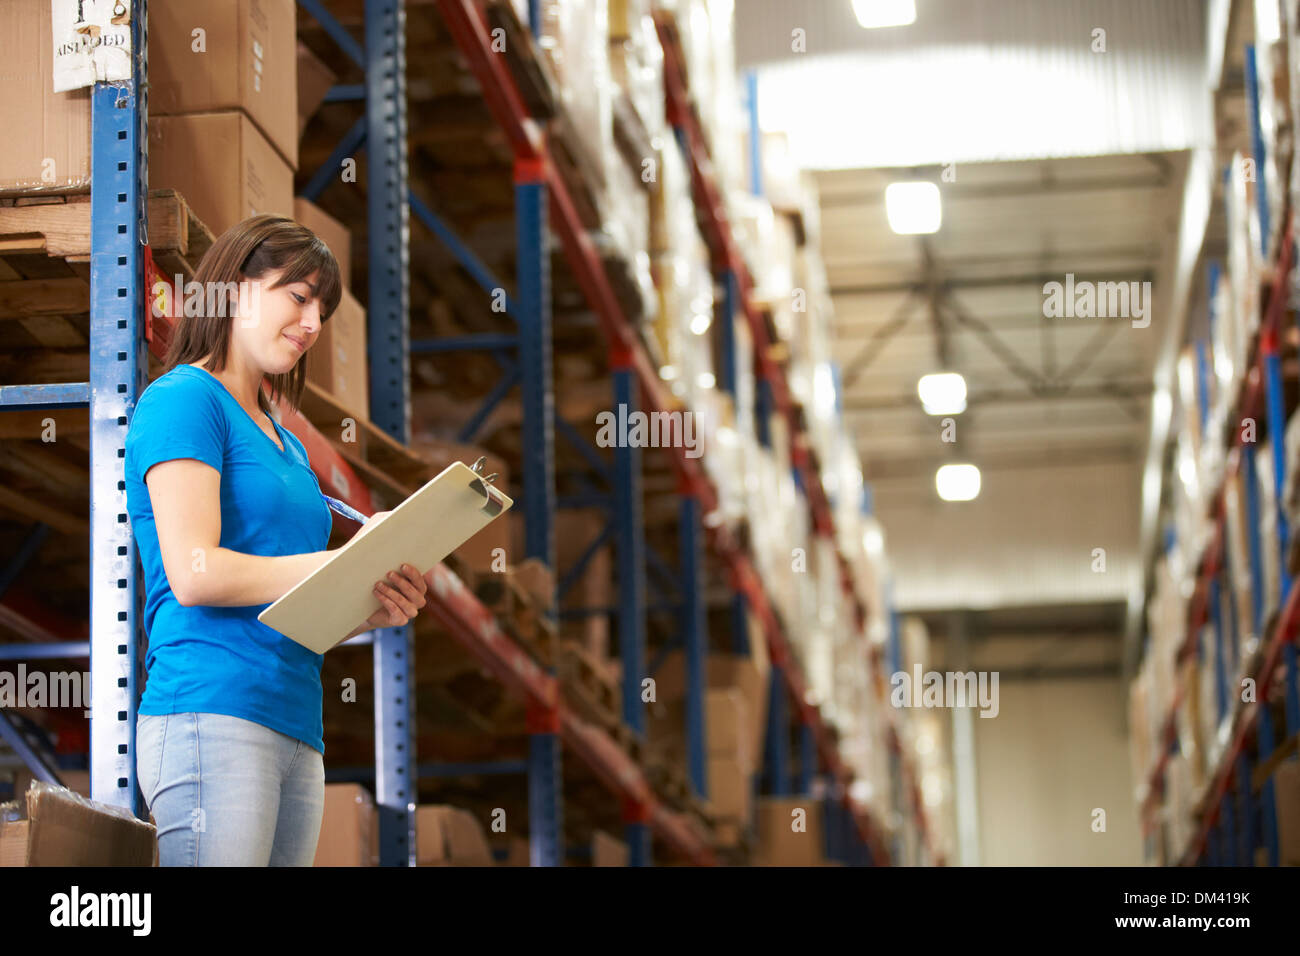 Female Worker In Distribution Warehouse Stock Photo